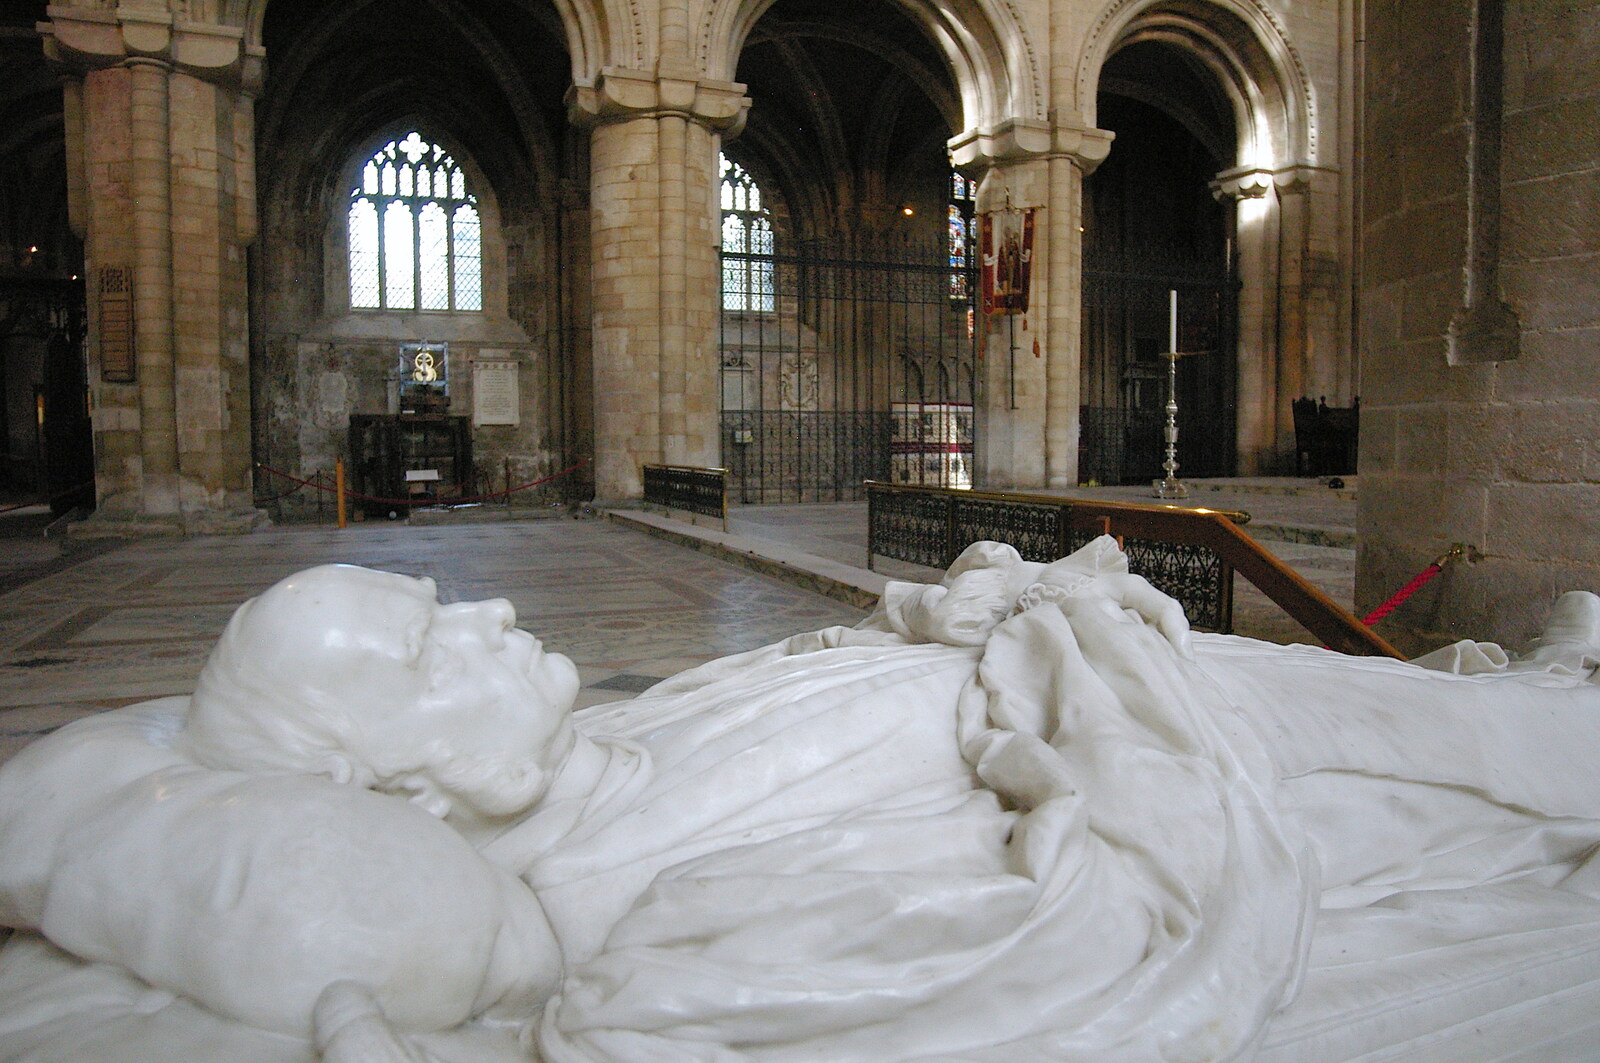 A sleeping marble dude from Peterborough Cathedral, Cambridgeshire - 7th September 2005